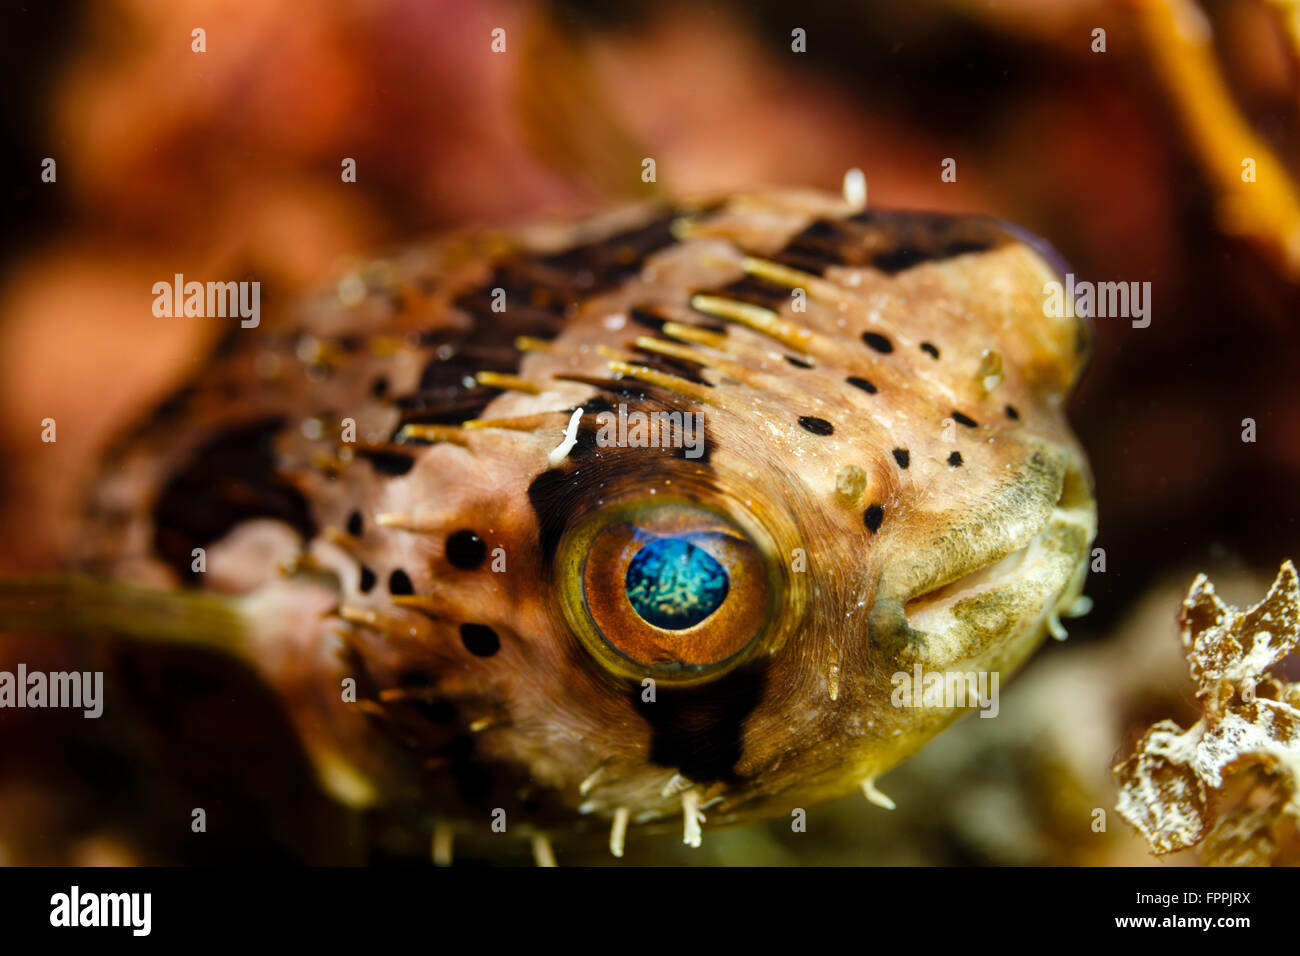 Closeup of turquoise eye of black and white spotted Puffer fish Stock Photo  - Alamy